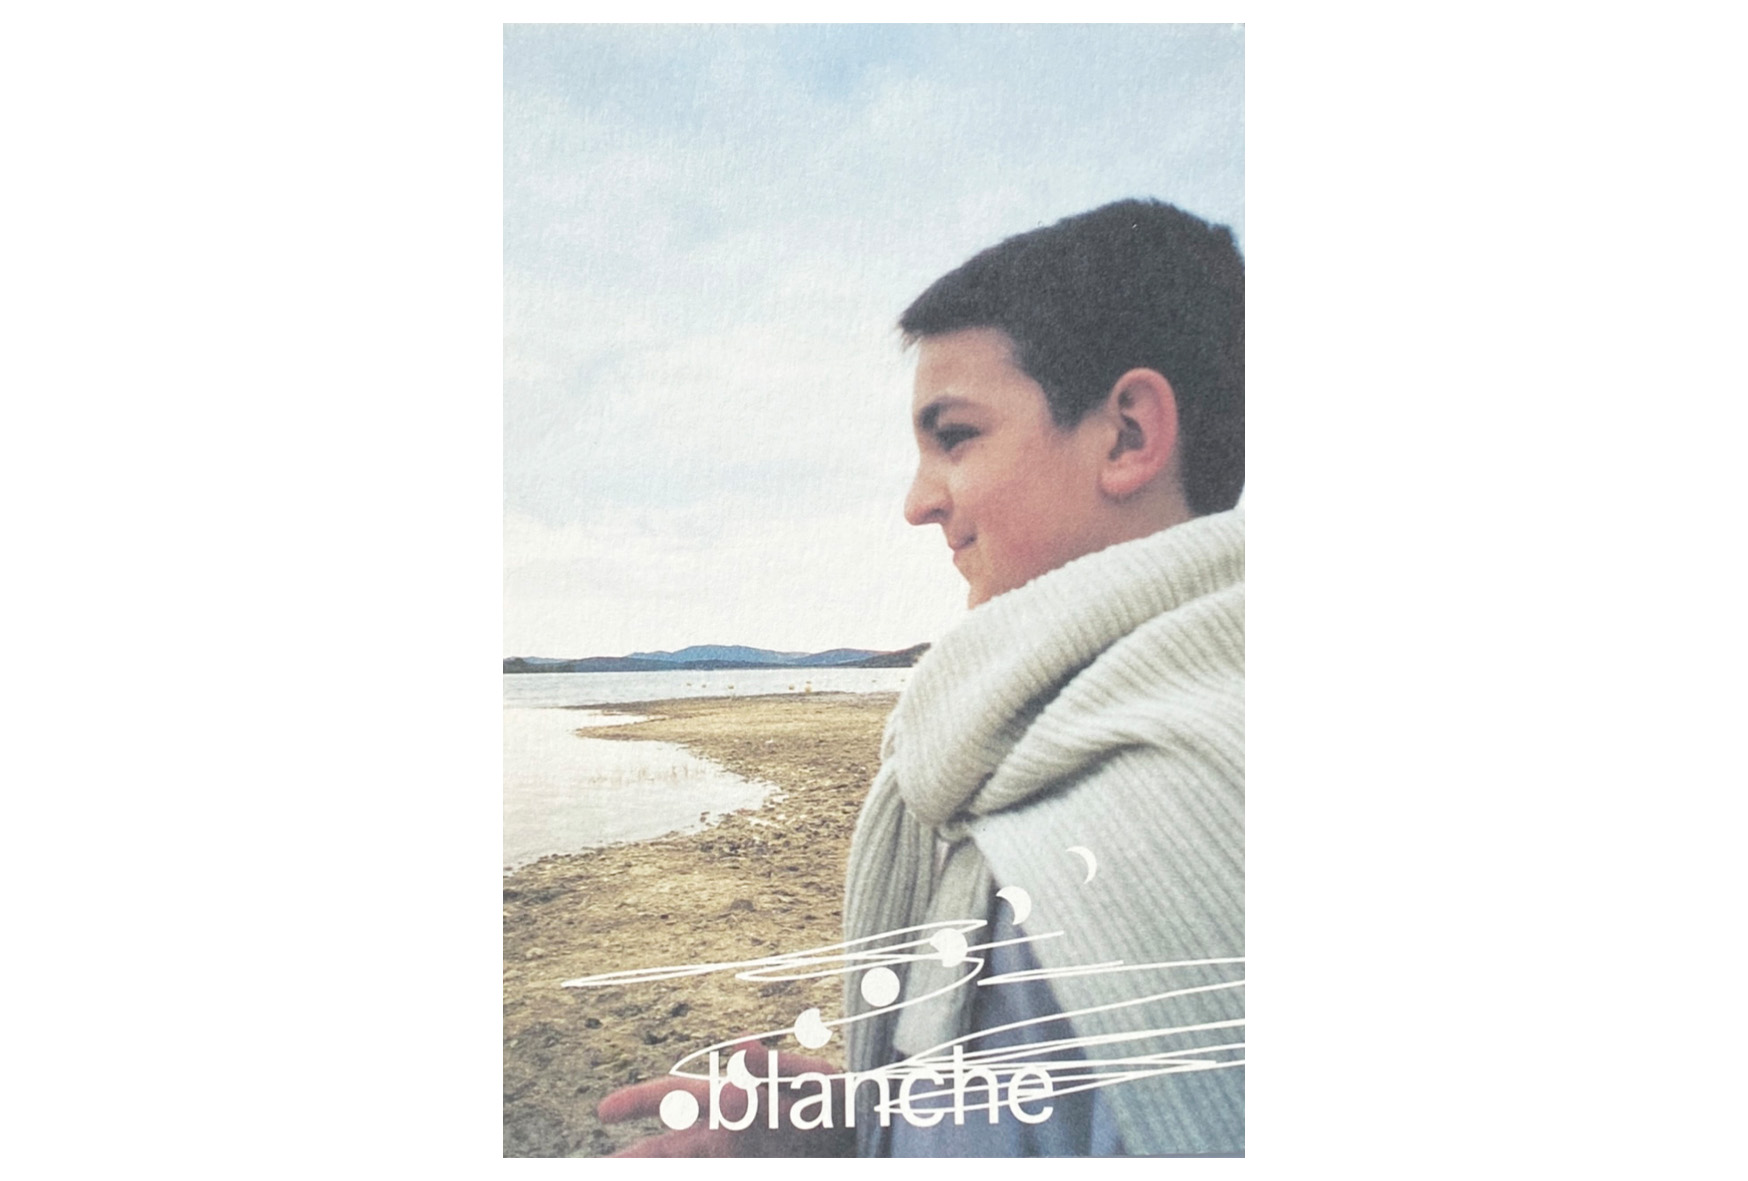 blanche -Days in South-West France-,                                  Galerie MIYABI, Nagoya Japan,  May 7 – 25, 2002, solo show